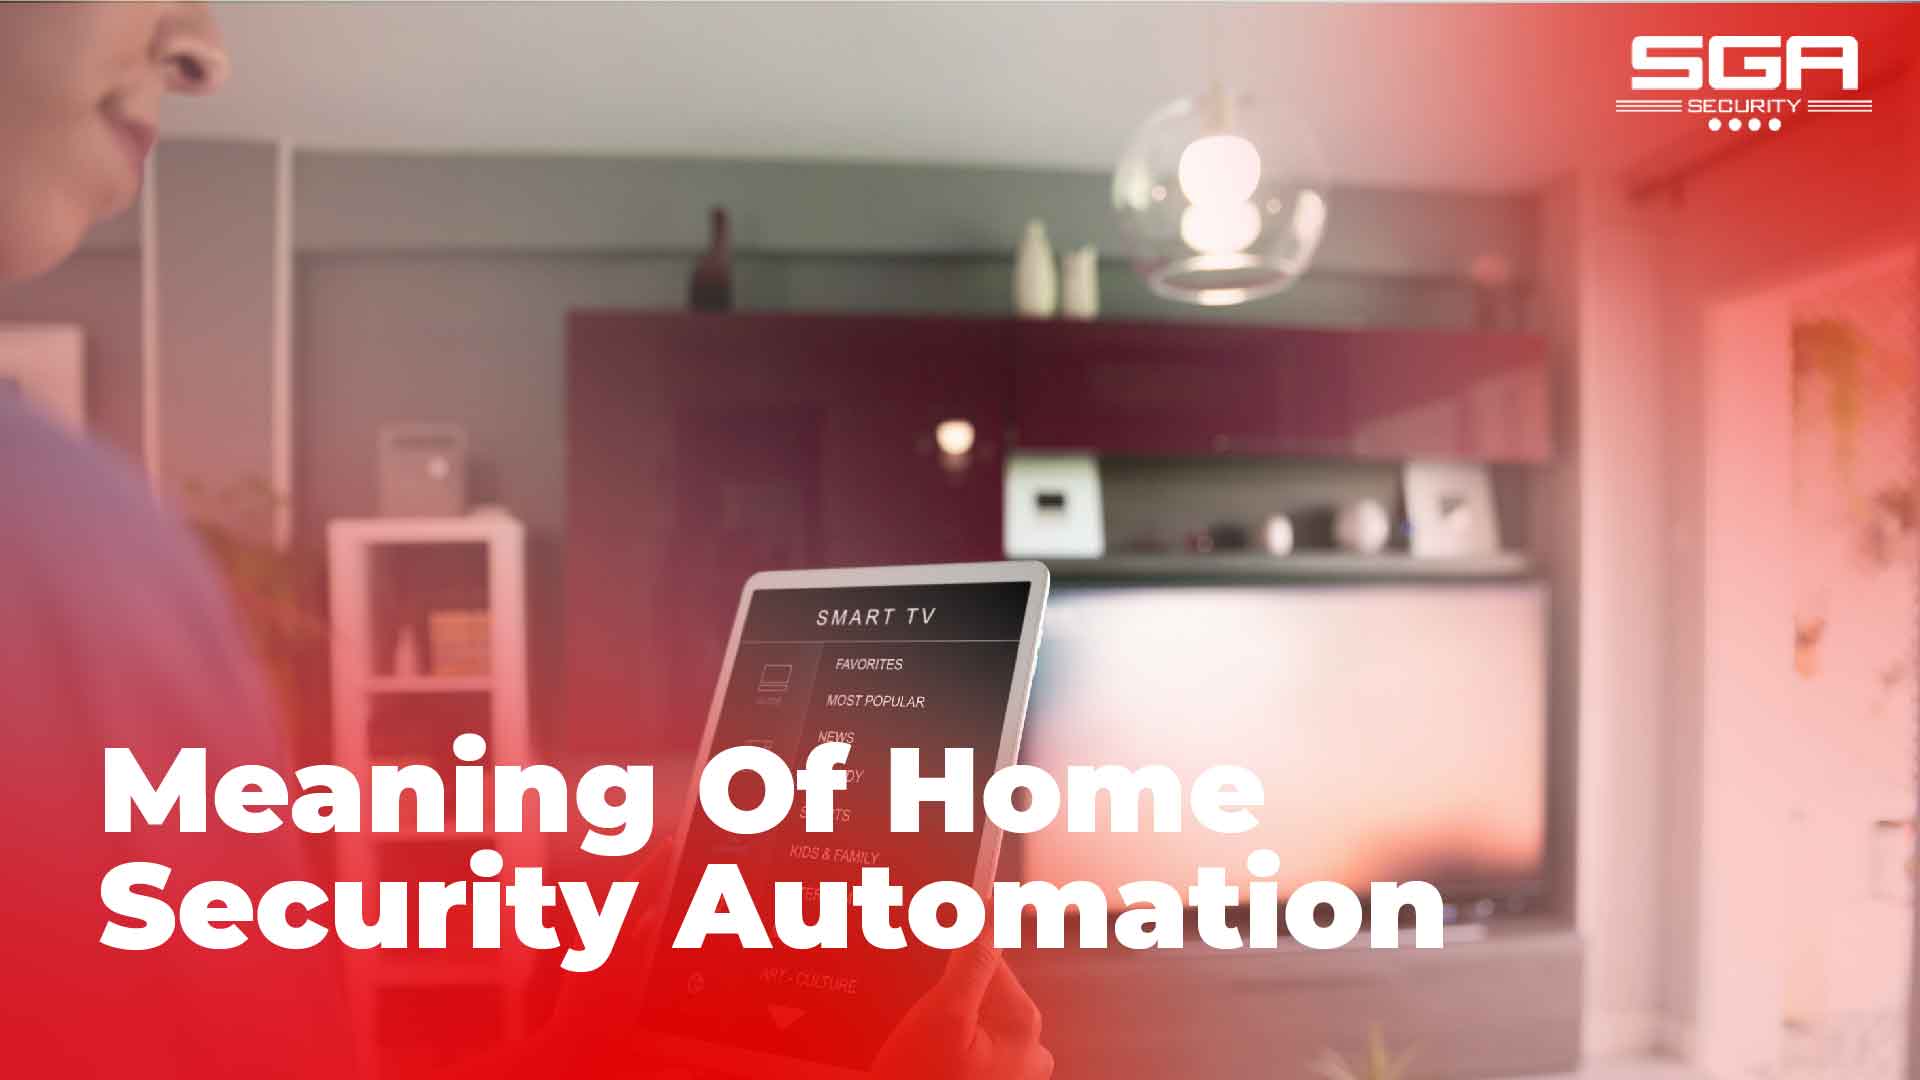 Person operating a home security automation system